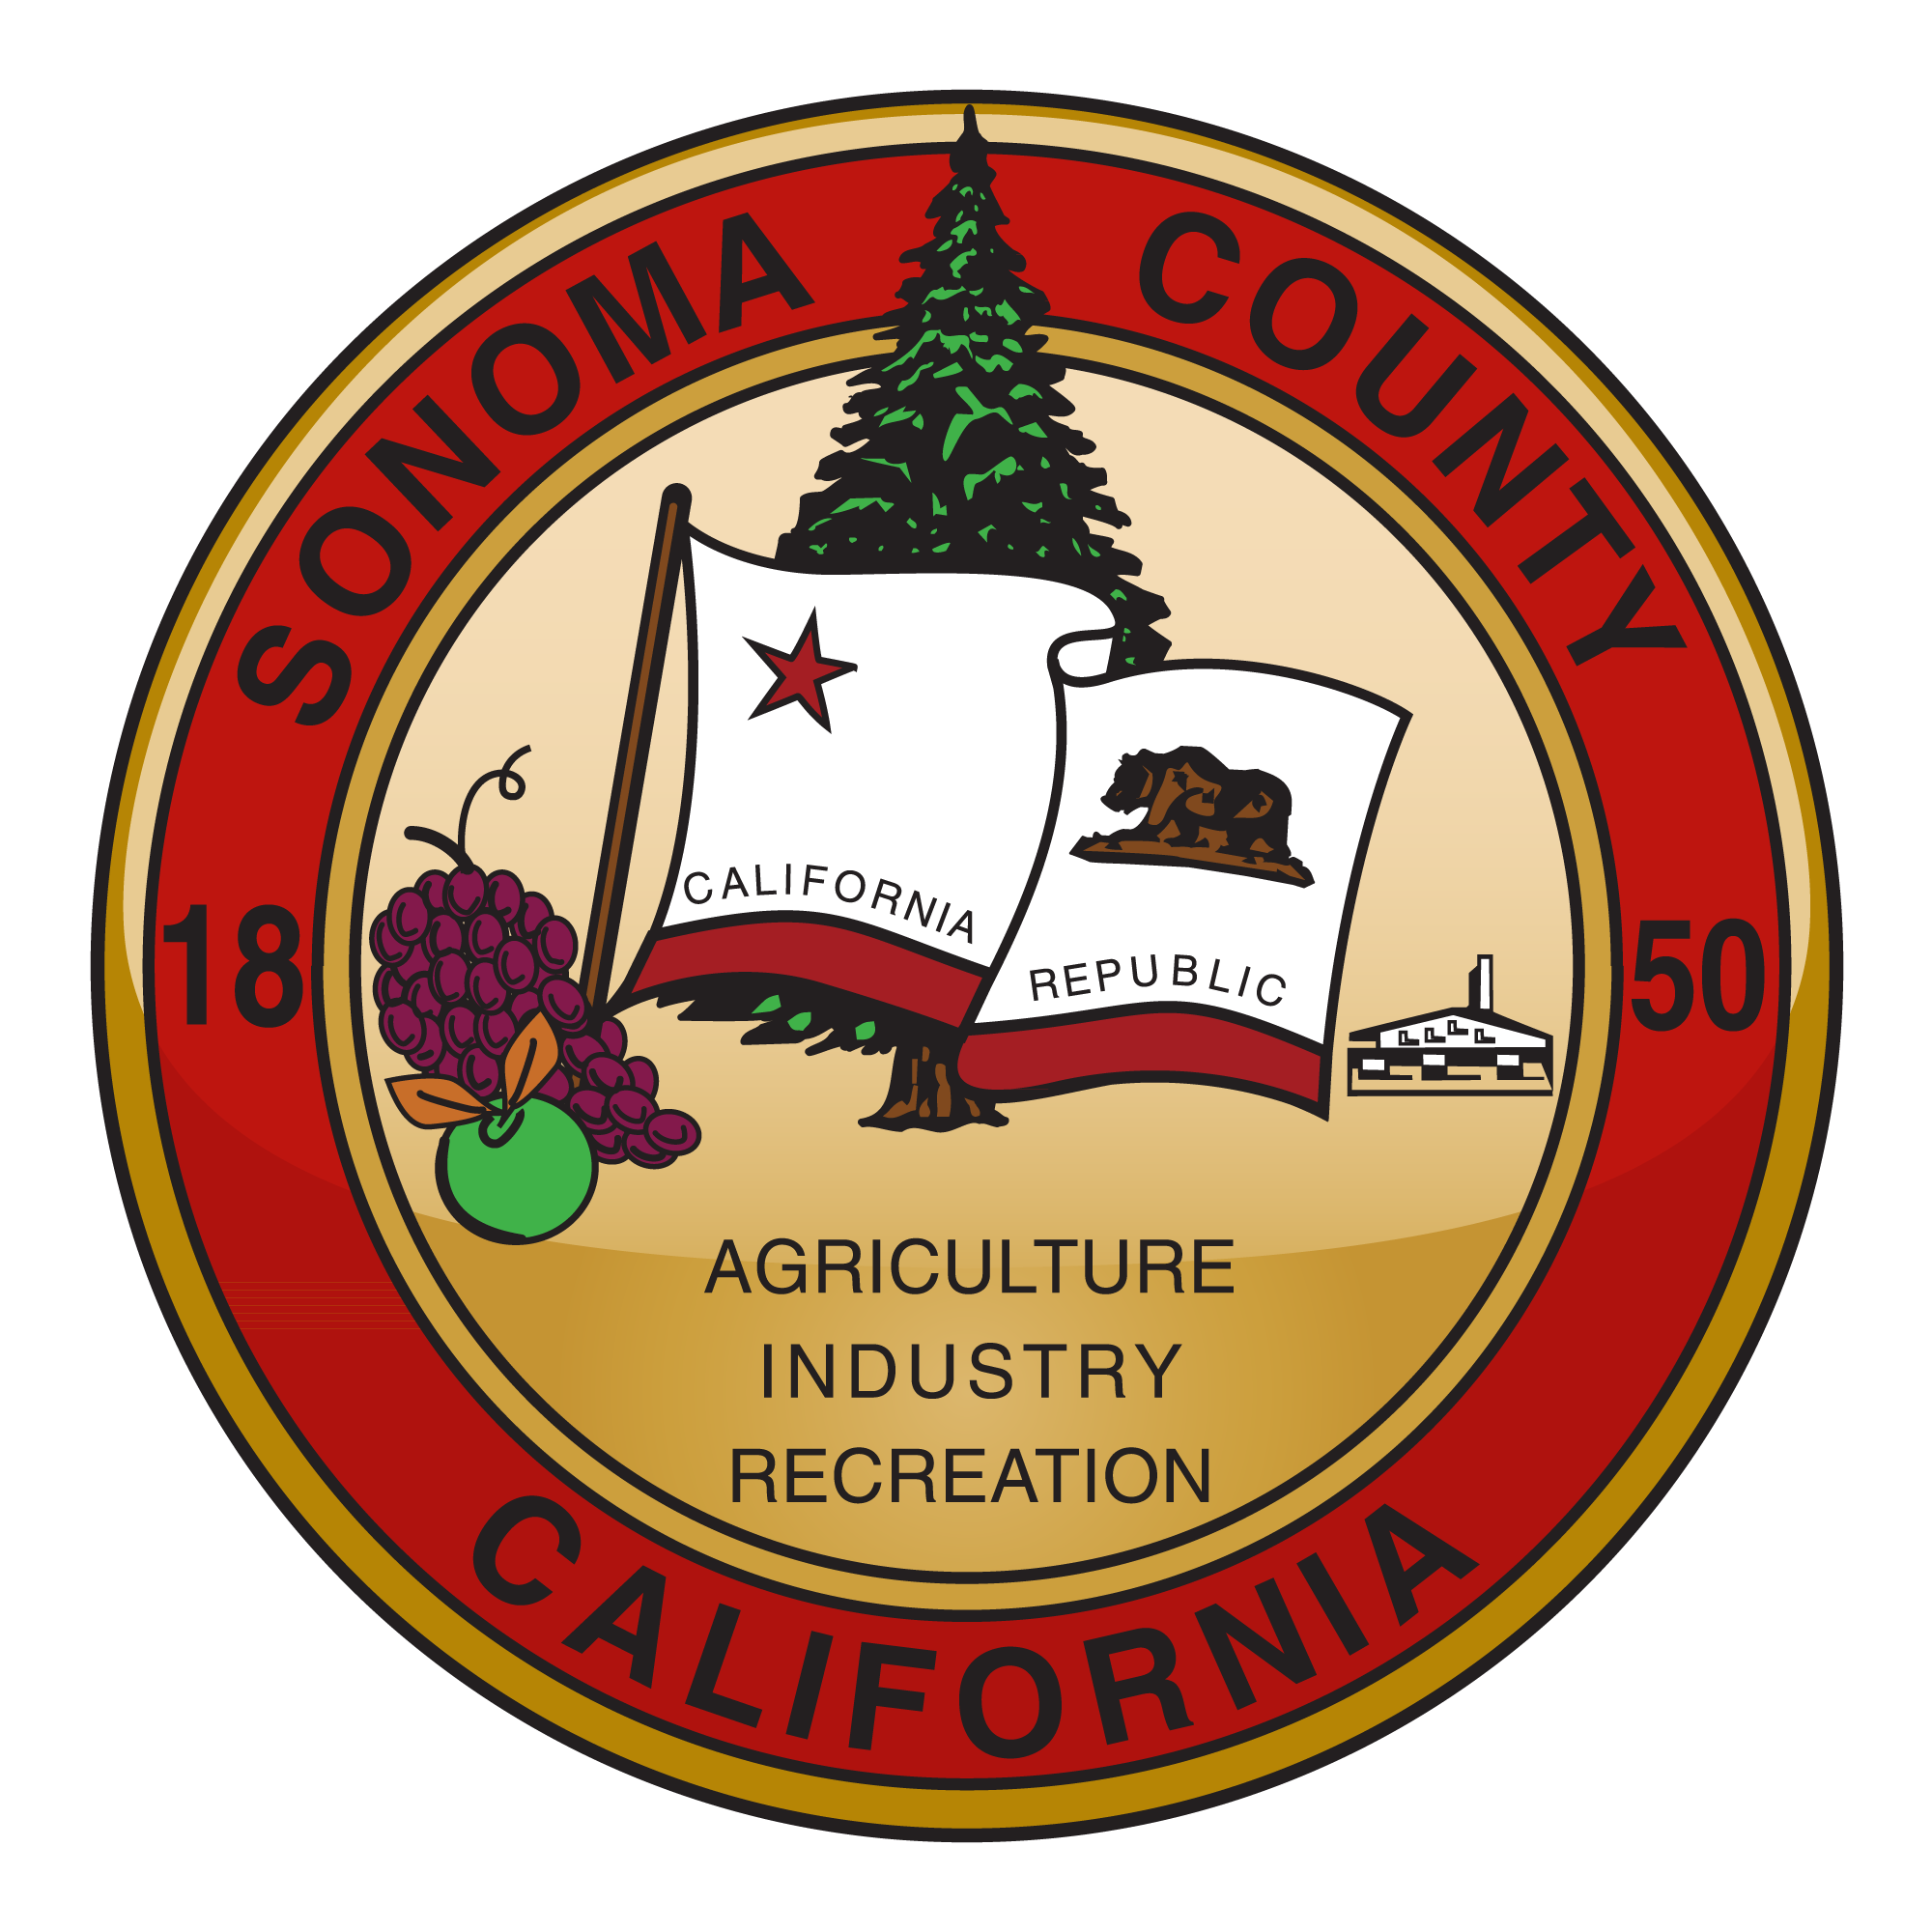 County of Sonoma Logo.png